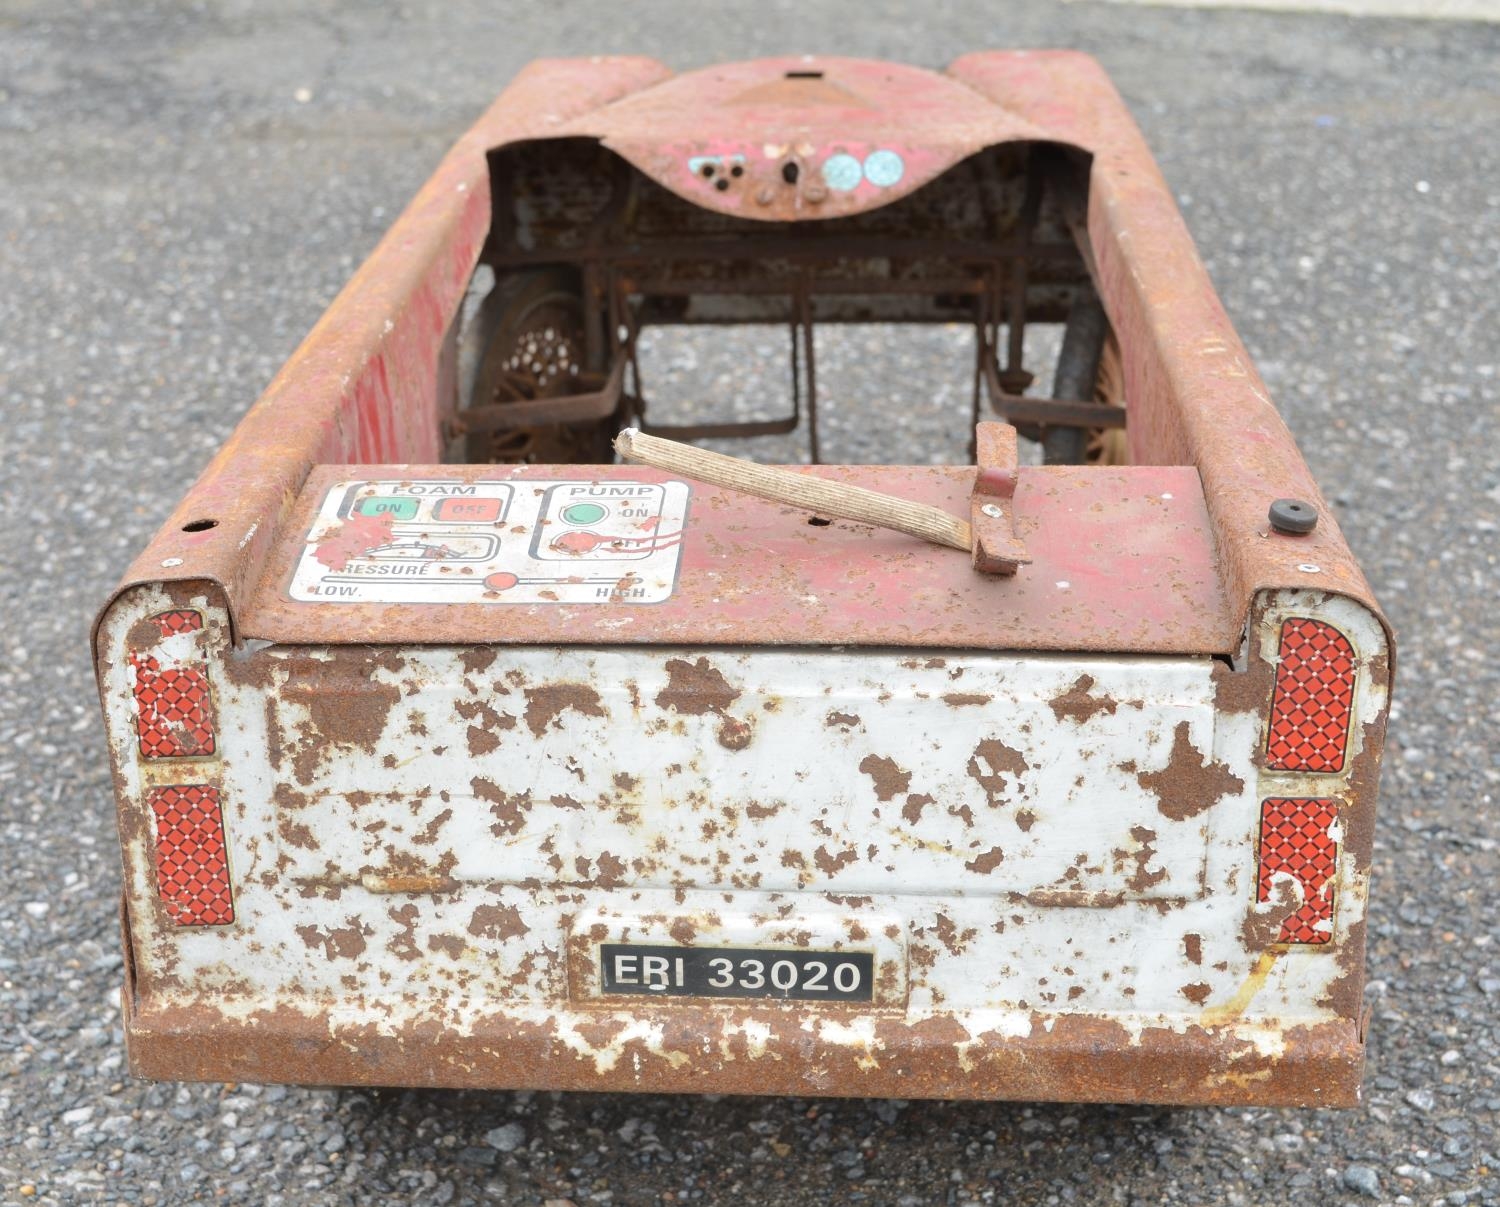 Vintage Mobo "Fire Chief" pressed steel child's pedal car (in need of restoration). Pedal function - Image 5 of 10